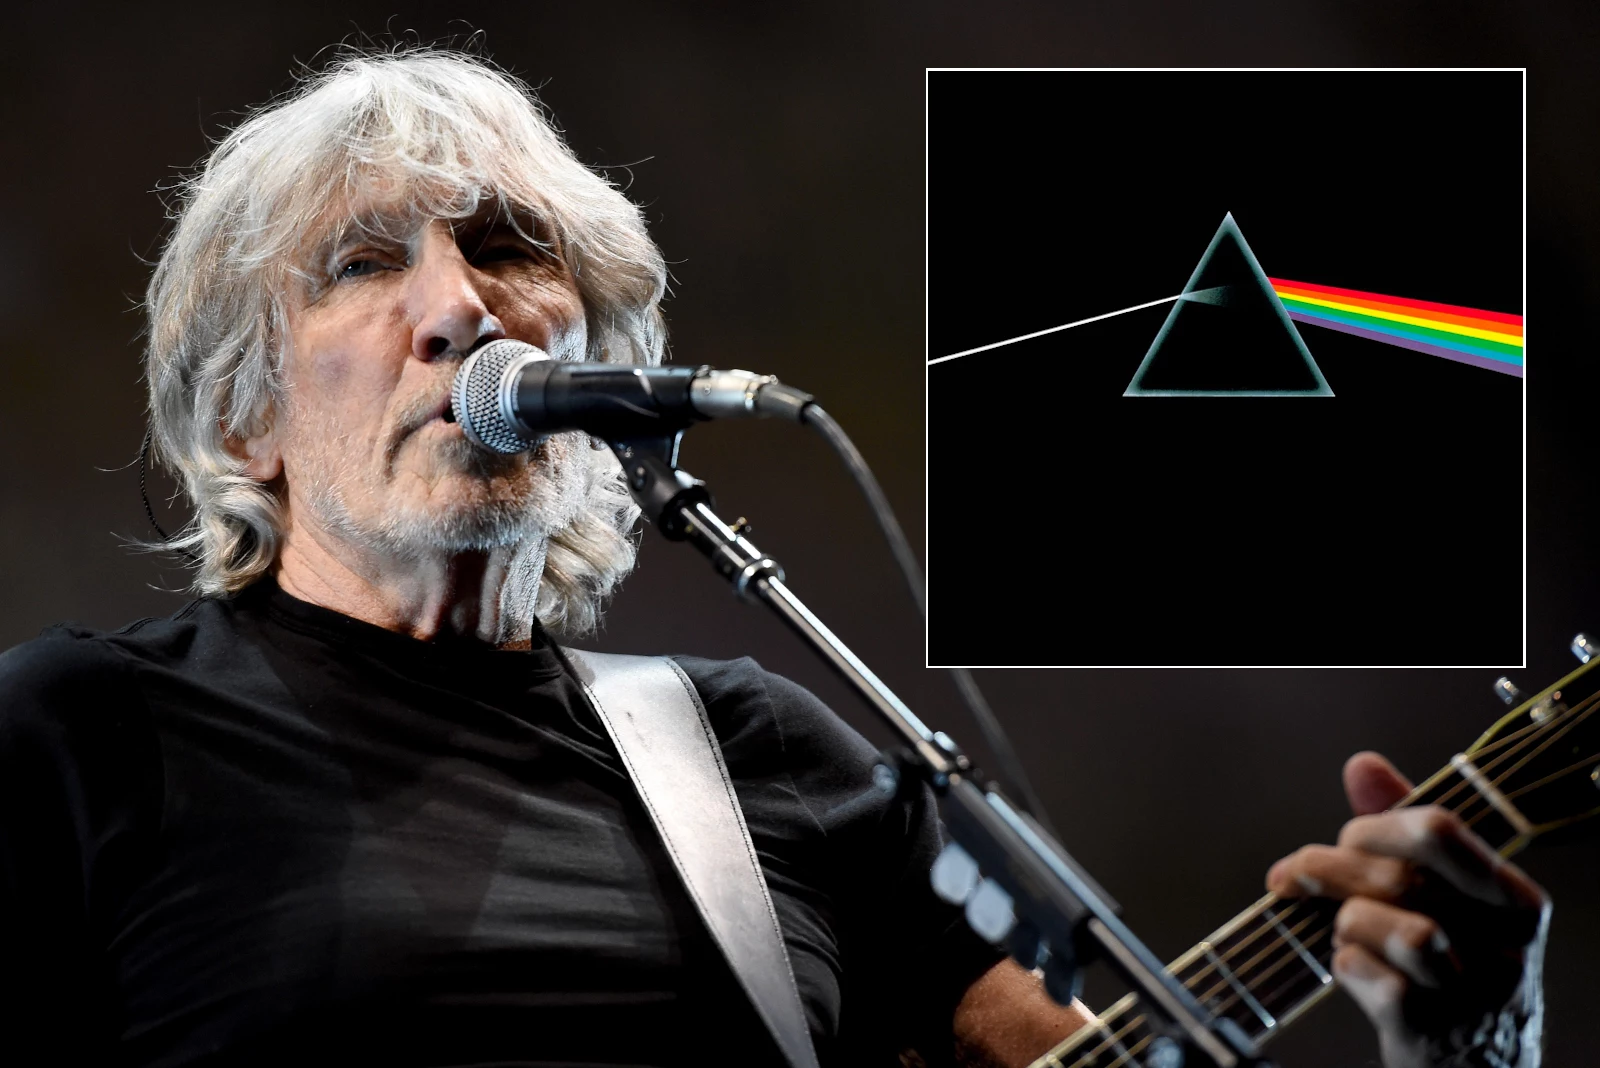 Roger Waters has secretly rerecorded Pink Floyd classic Dark Side of